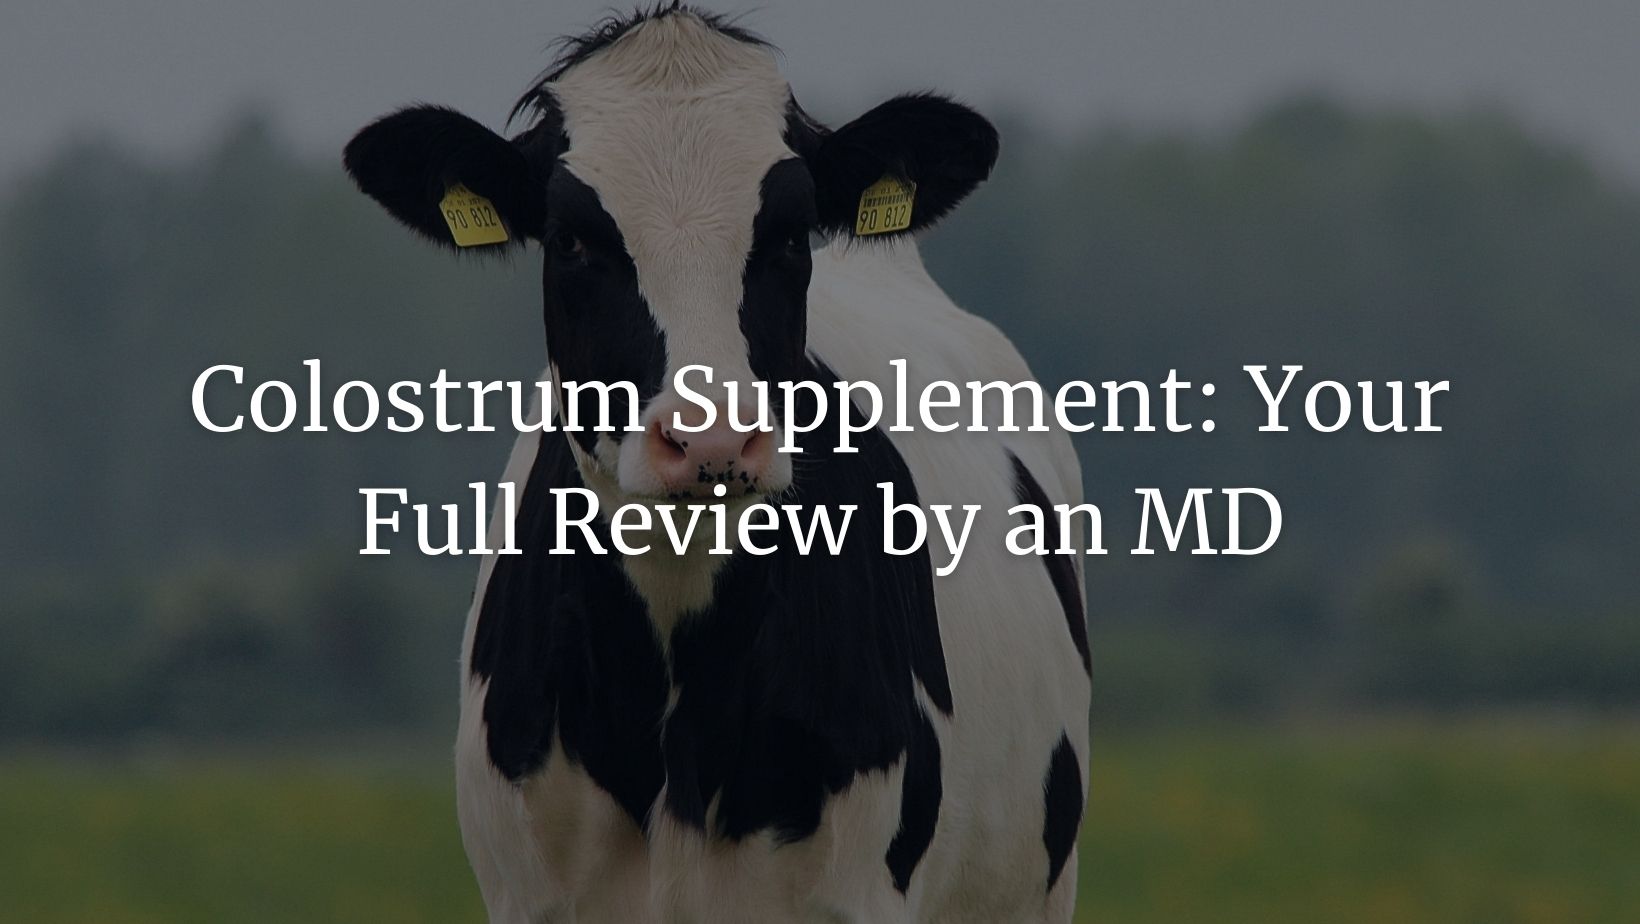 Colostrum supplements featured image